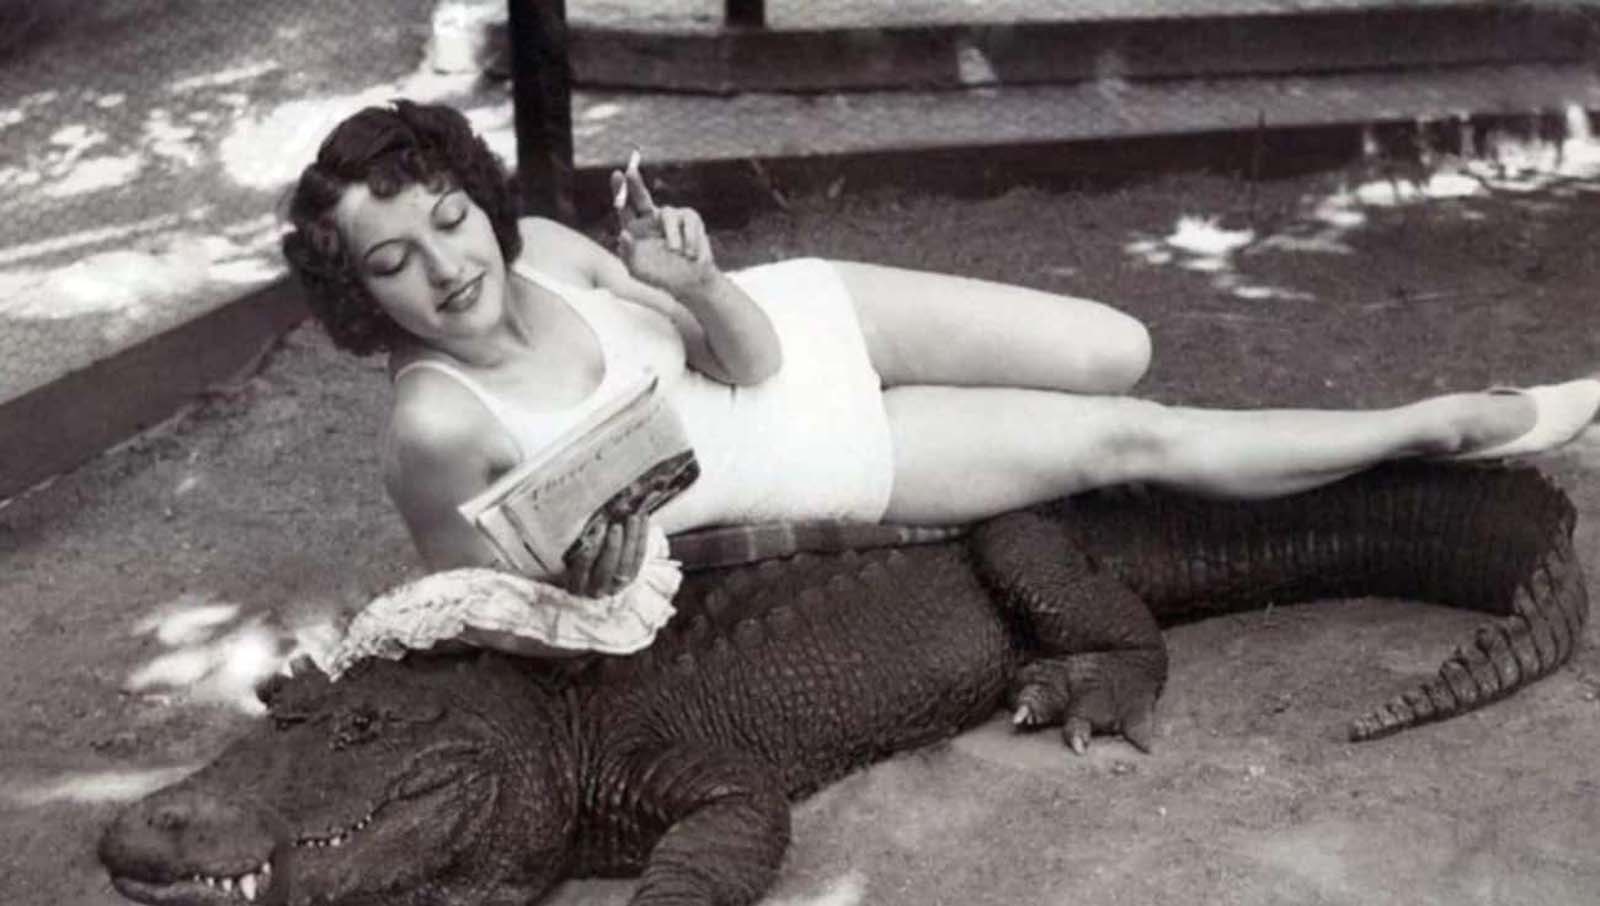 Los Angeles Alligator Farm: The Amusement Park where visitors could Ride and Play with Alligators